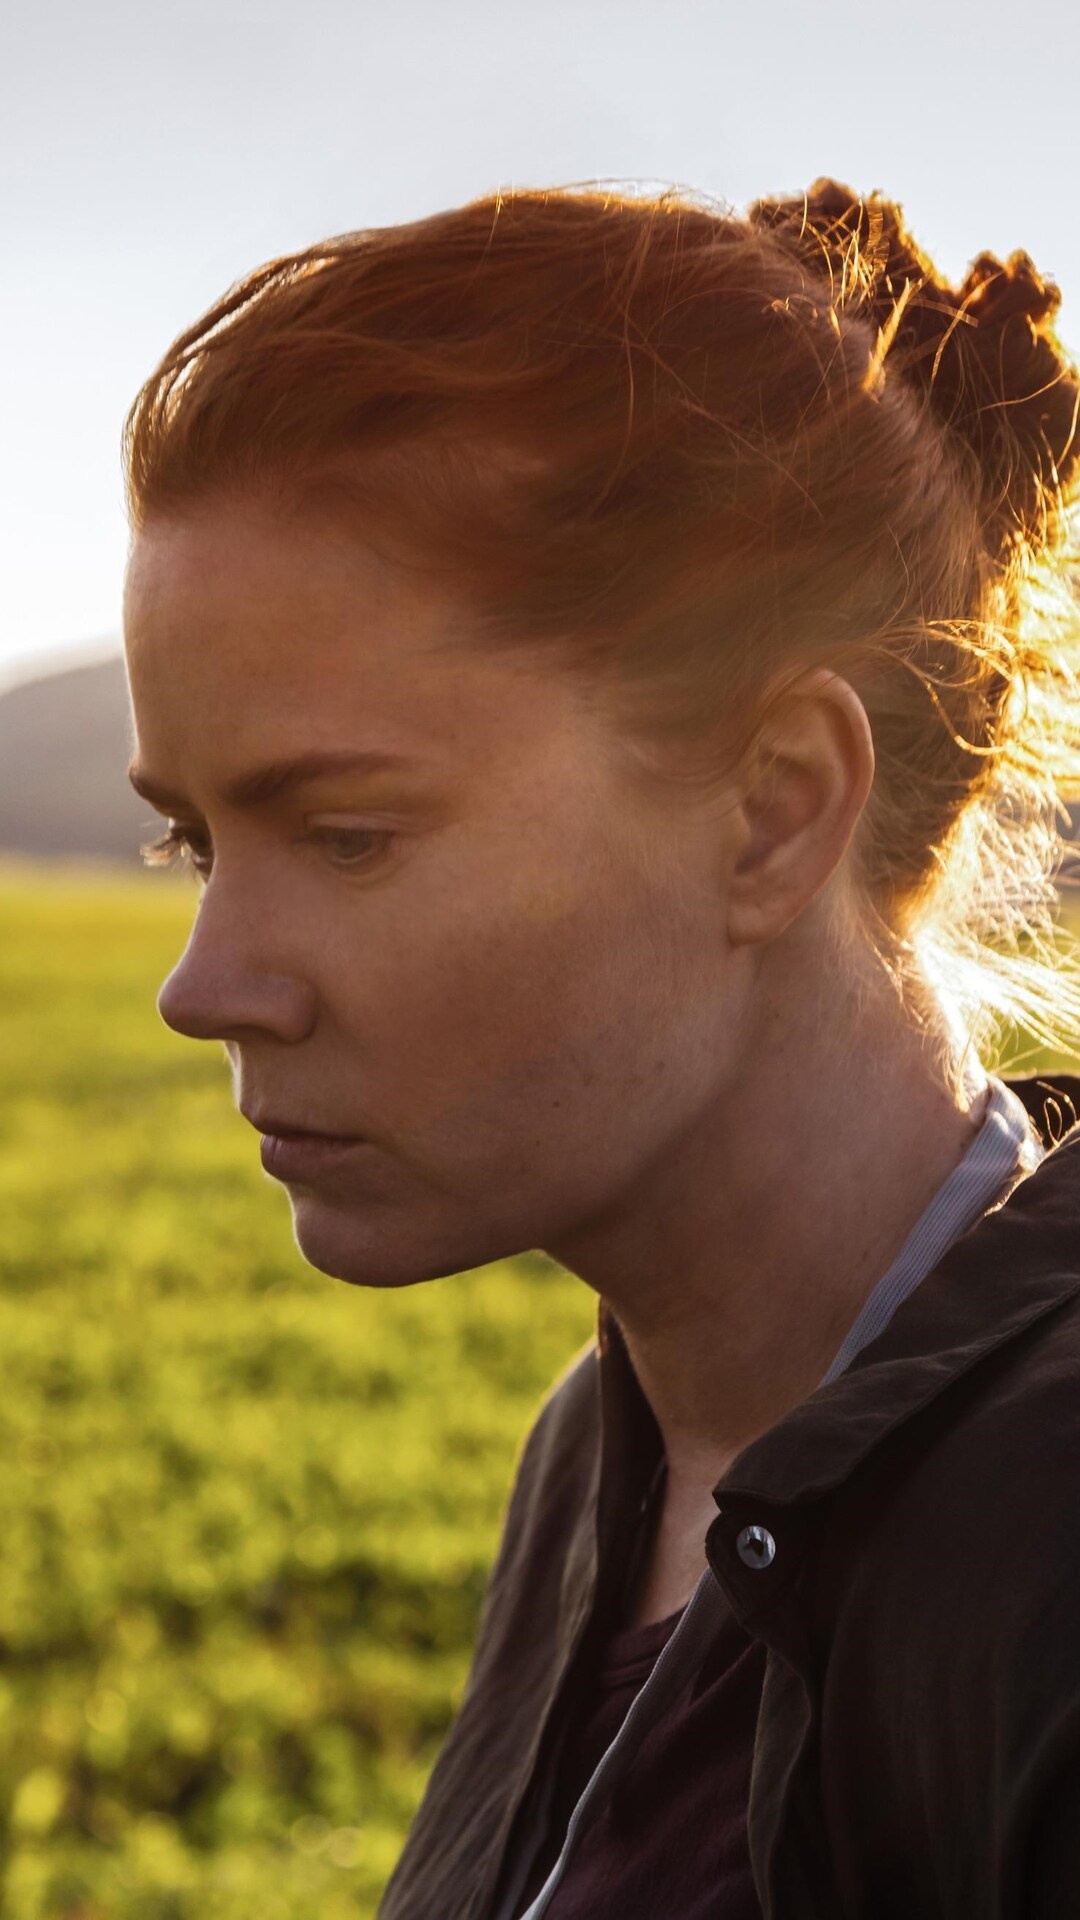 Arrival (Movie): Amy Adams, A linguist enlisted by the United States Army to discover how to communicate with extraterrestrial aliens who have arrived on Earth. 1080x1920 Full HD Wallpaper.